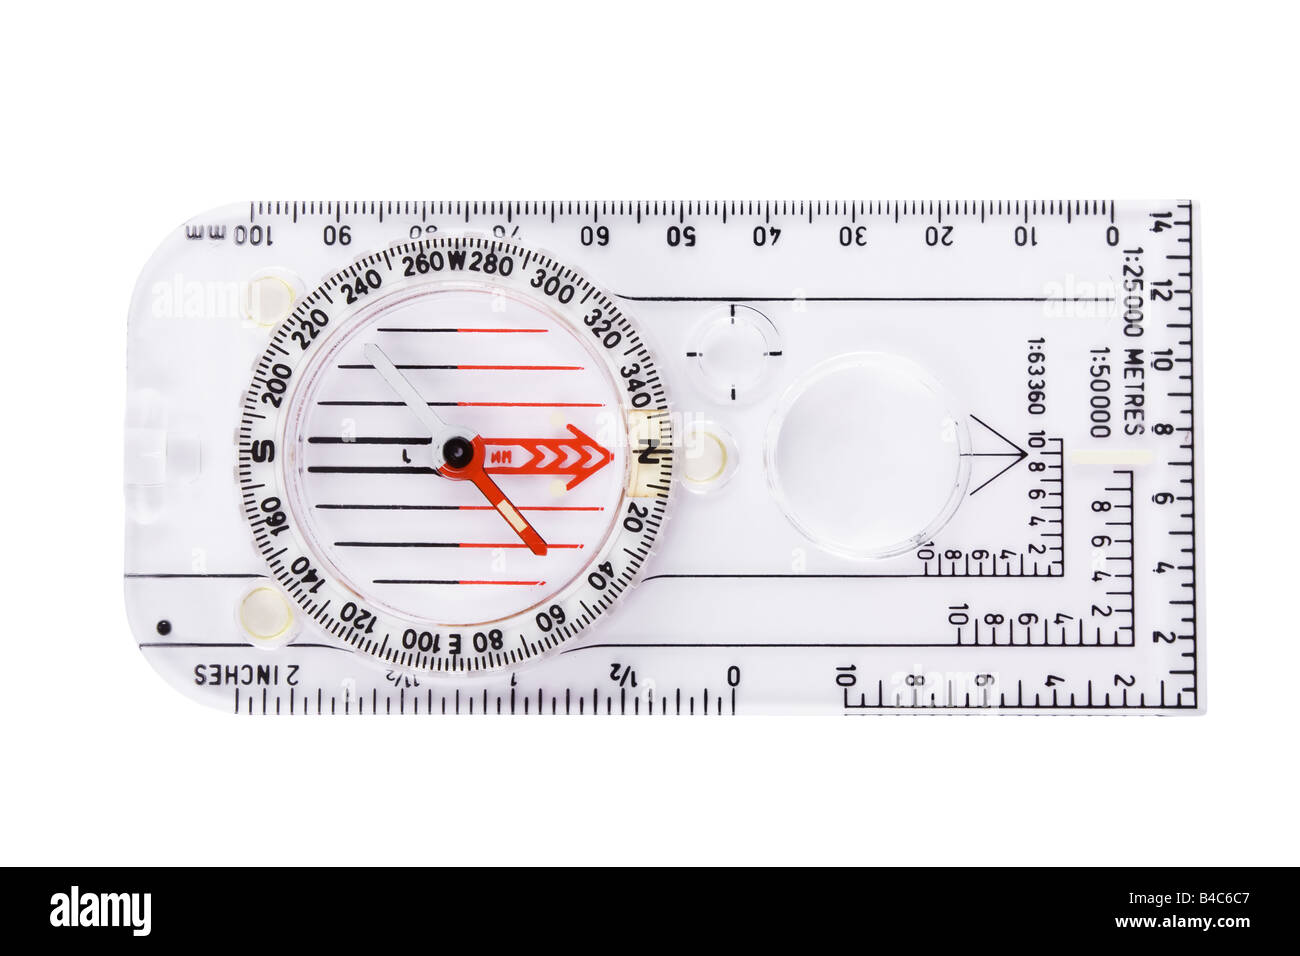 Modern compass with scales and rulers isolated on white background. /// cut out cutout plastic transparent adventure navigation equipment ruler Stock Photo